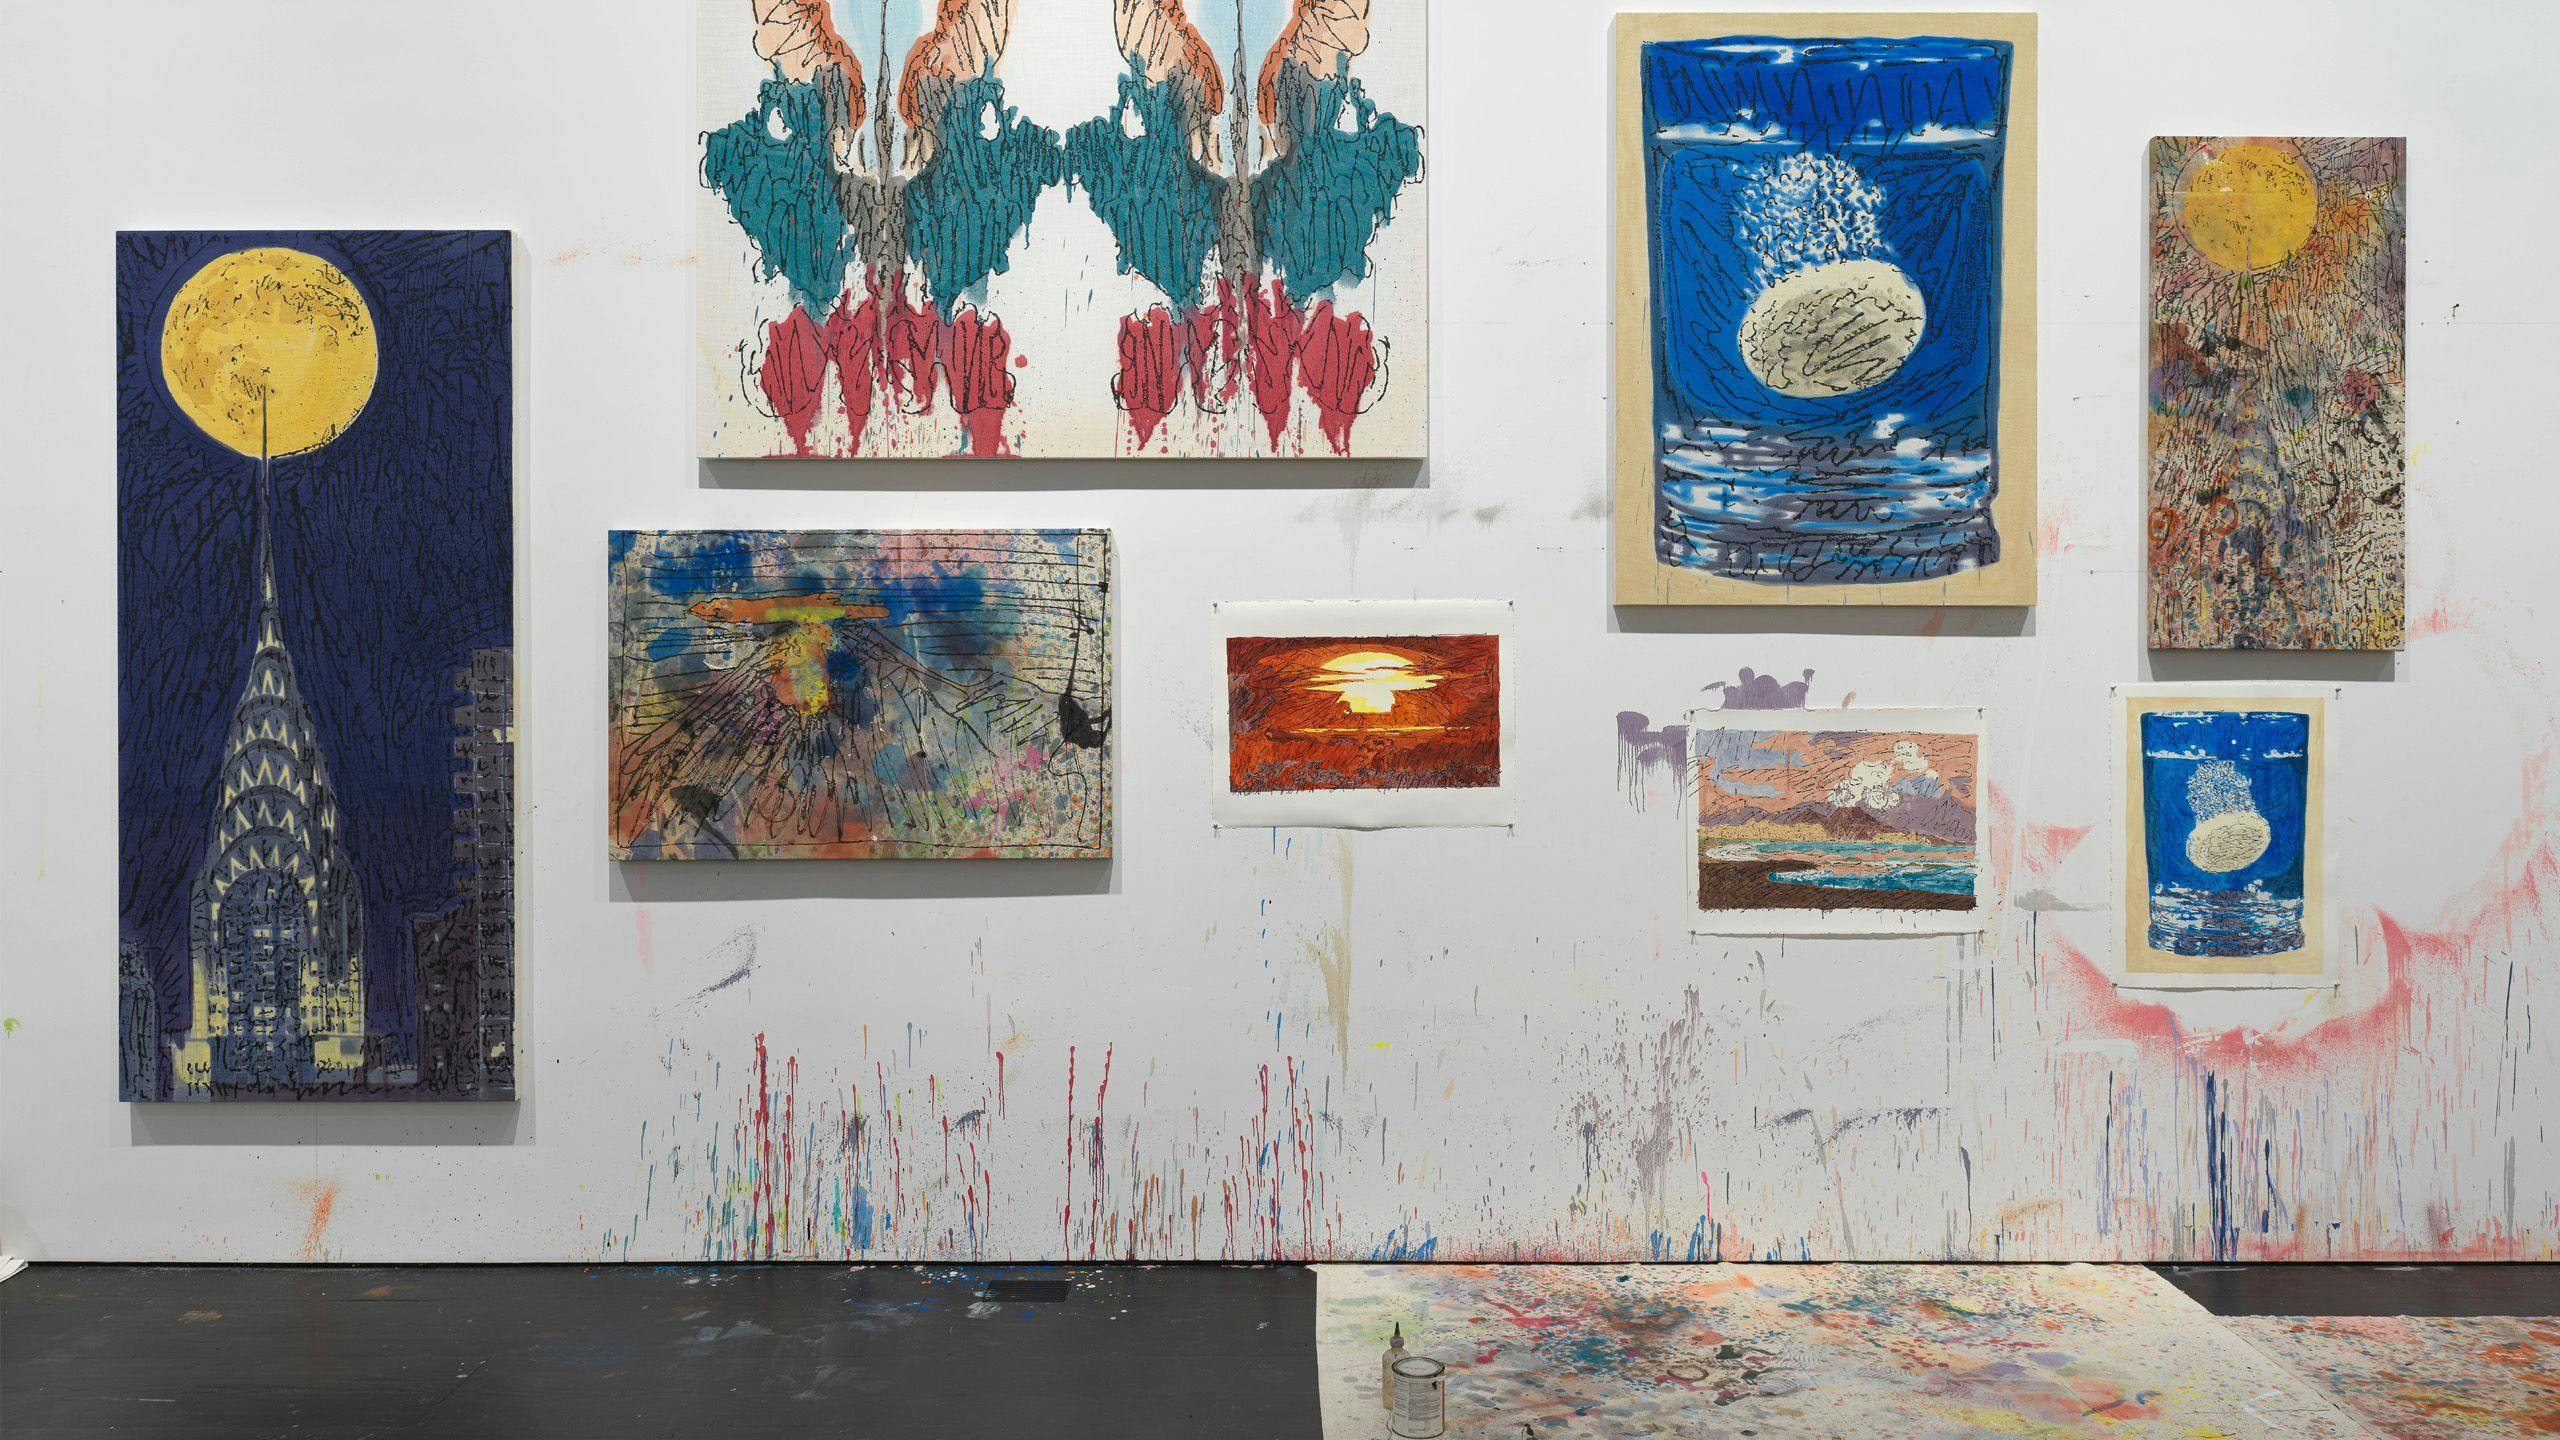 An image of Nate Lowman’s studio wall featuring paintings and works on paper that illustrate a new direction for the artist. Photo by Jeffrey Sturges